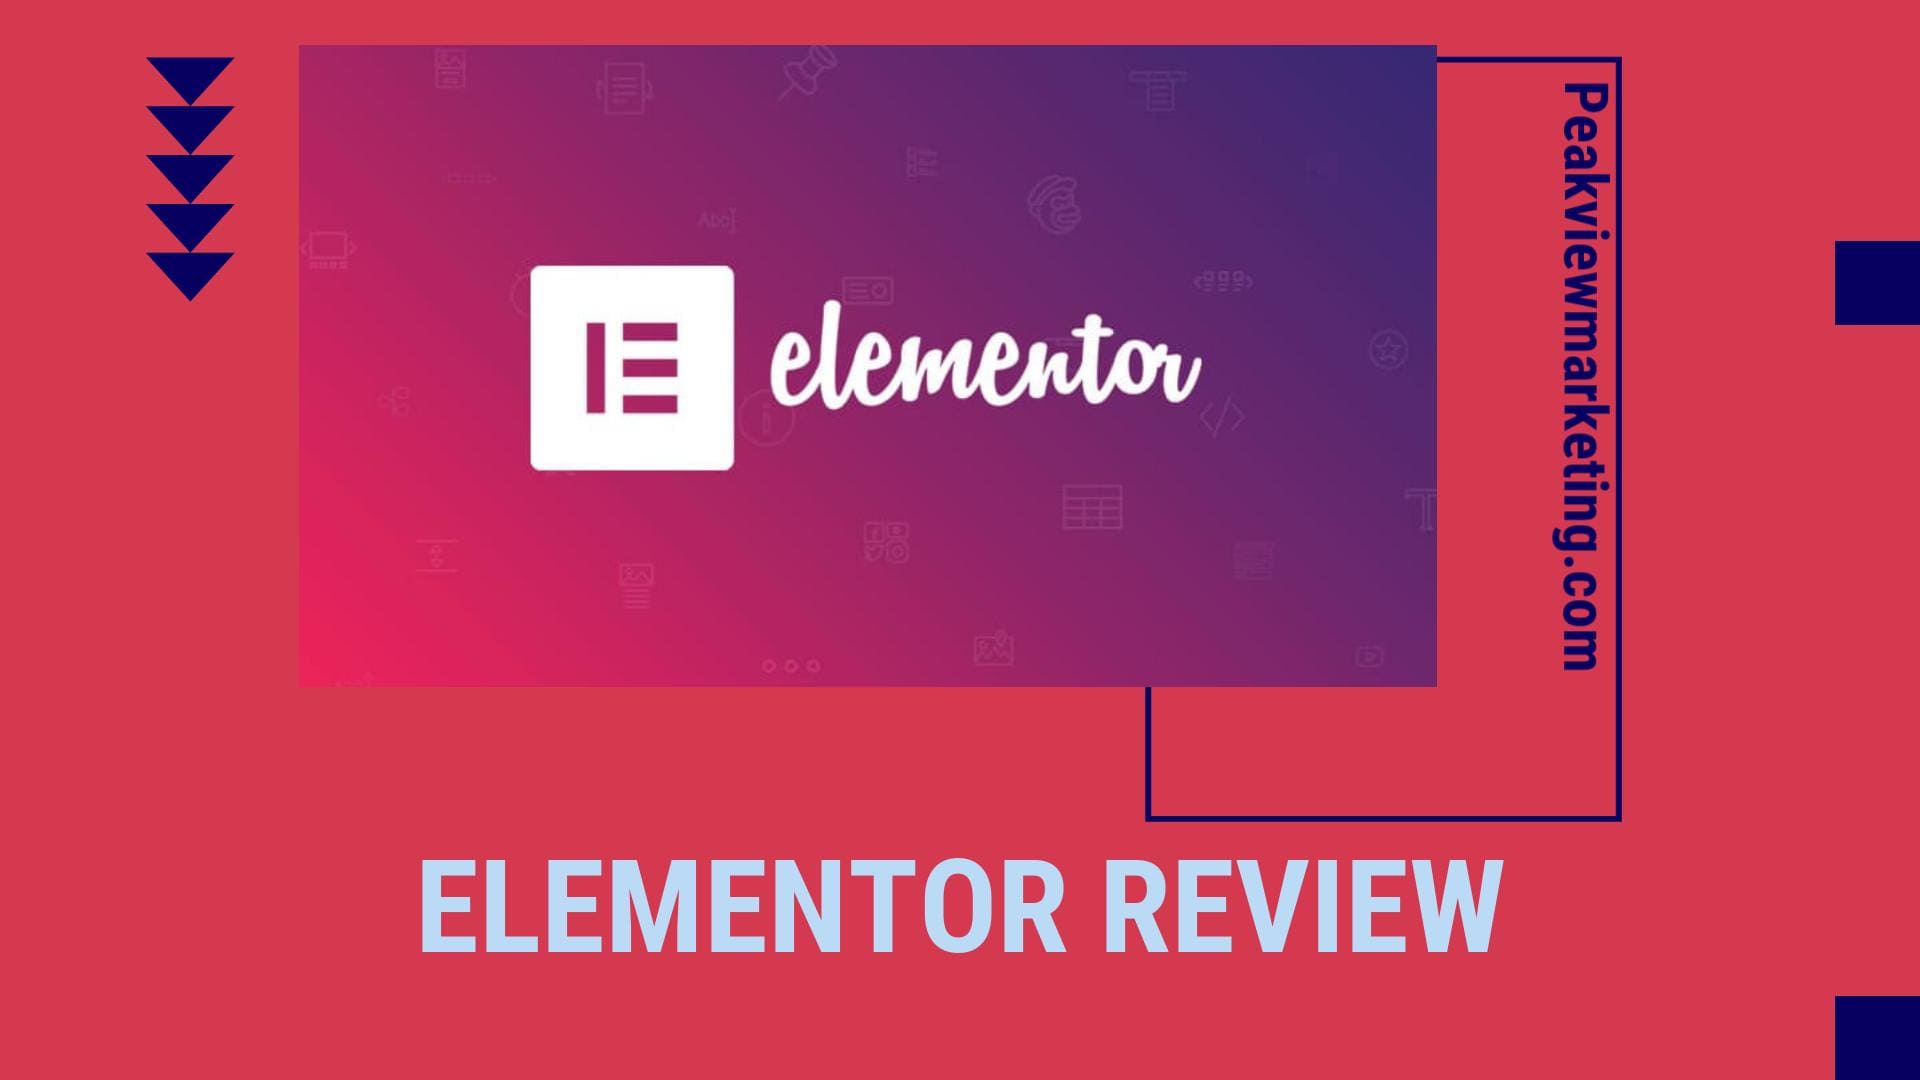 Elementor Review Image